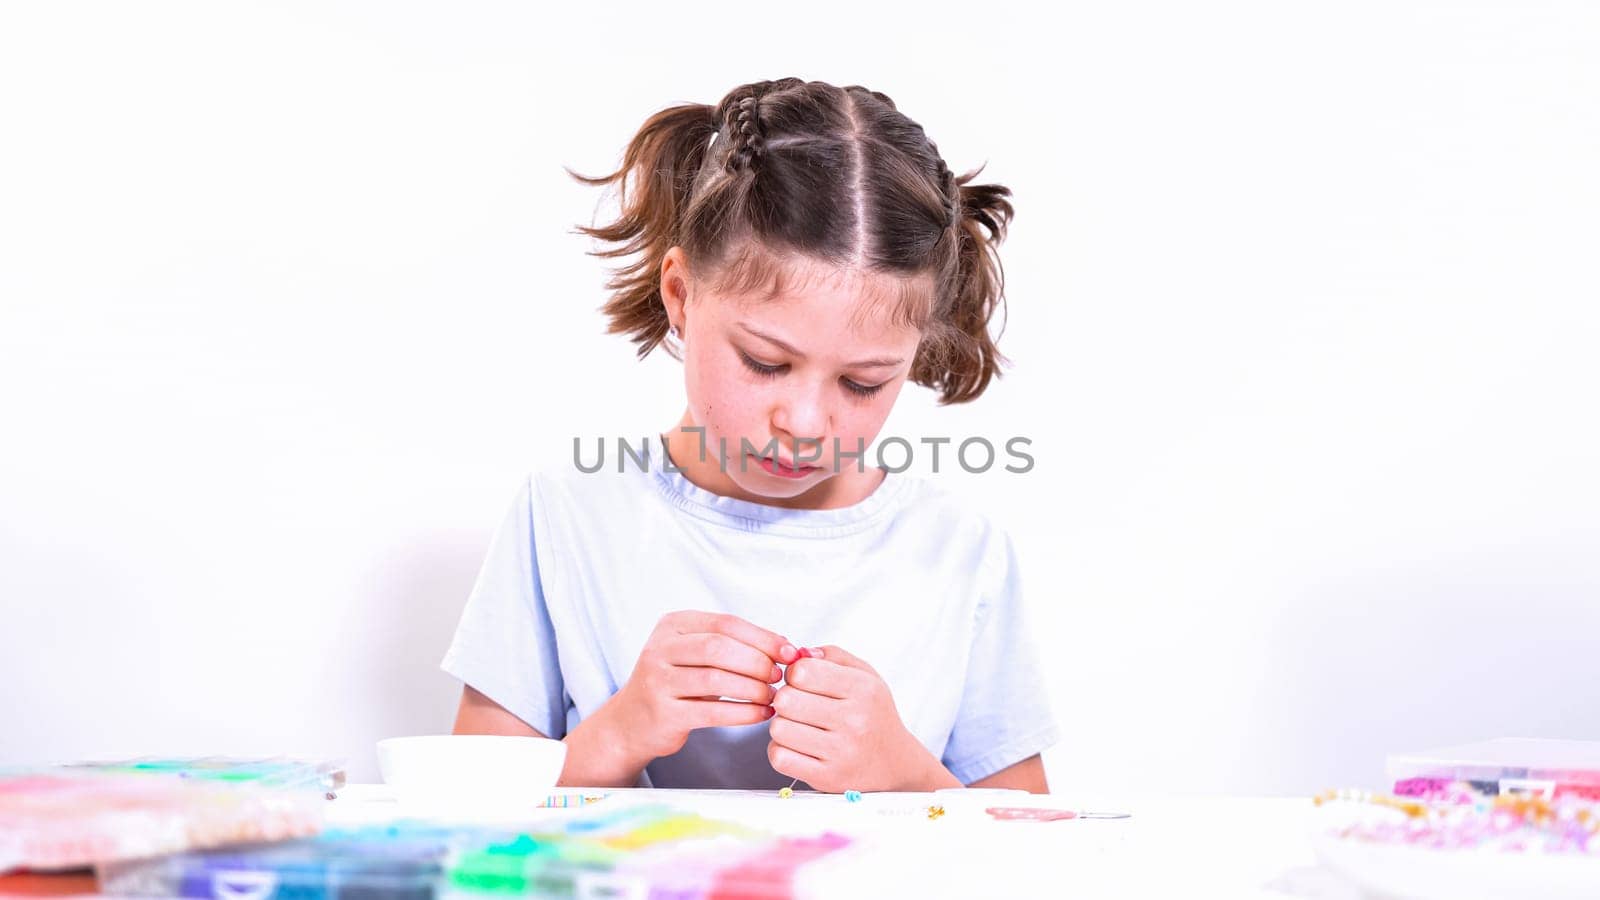 Delicate fingers of a young girl navigate through a treasure trove of bright, multicolored beads, each compartment revealing a new hue to choose from. She's immersed in the joyful task of stringing together a handmade bracelet, with golden beads and pearls lying nearby to add a touch of sparkle to her creation.